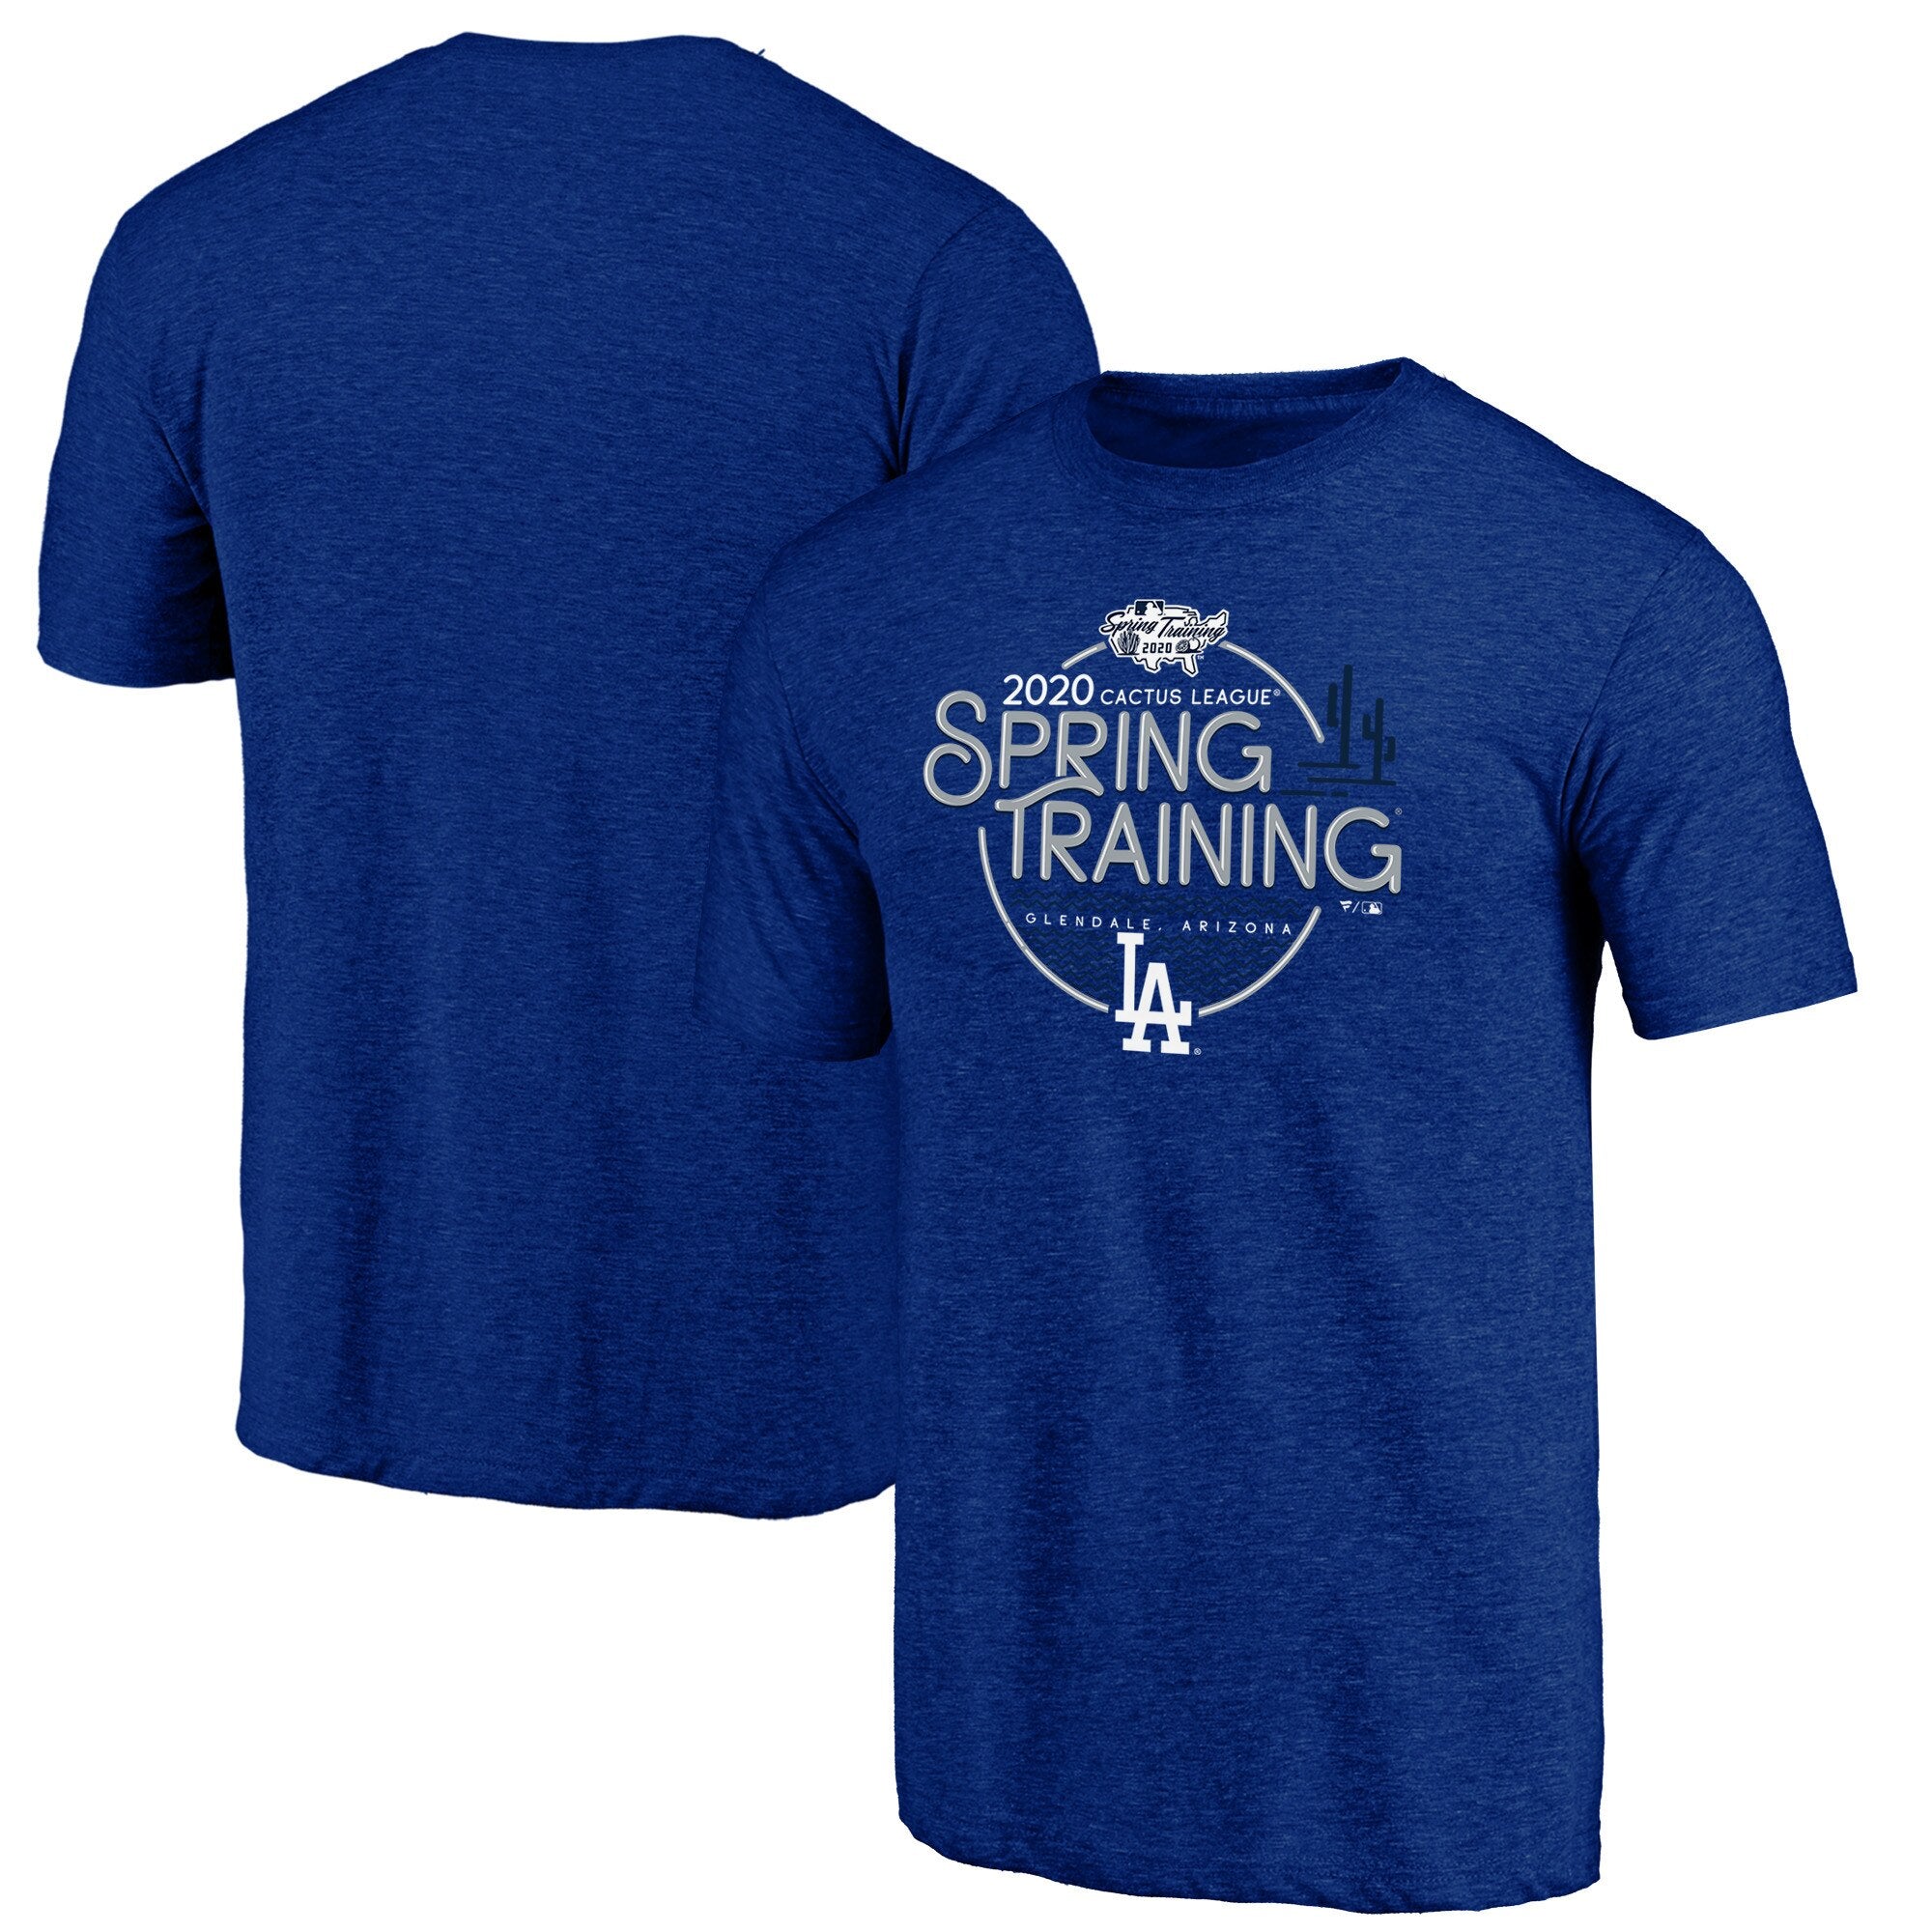 Los Angeles Dodgers Spring Training Gear, Dodgers Collection